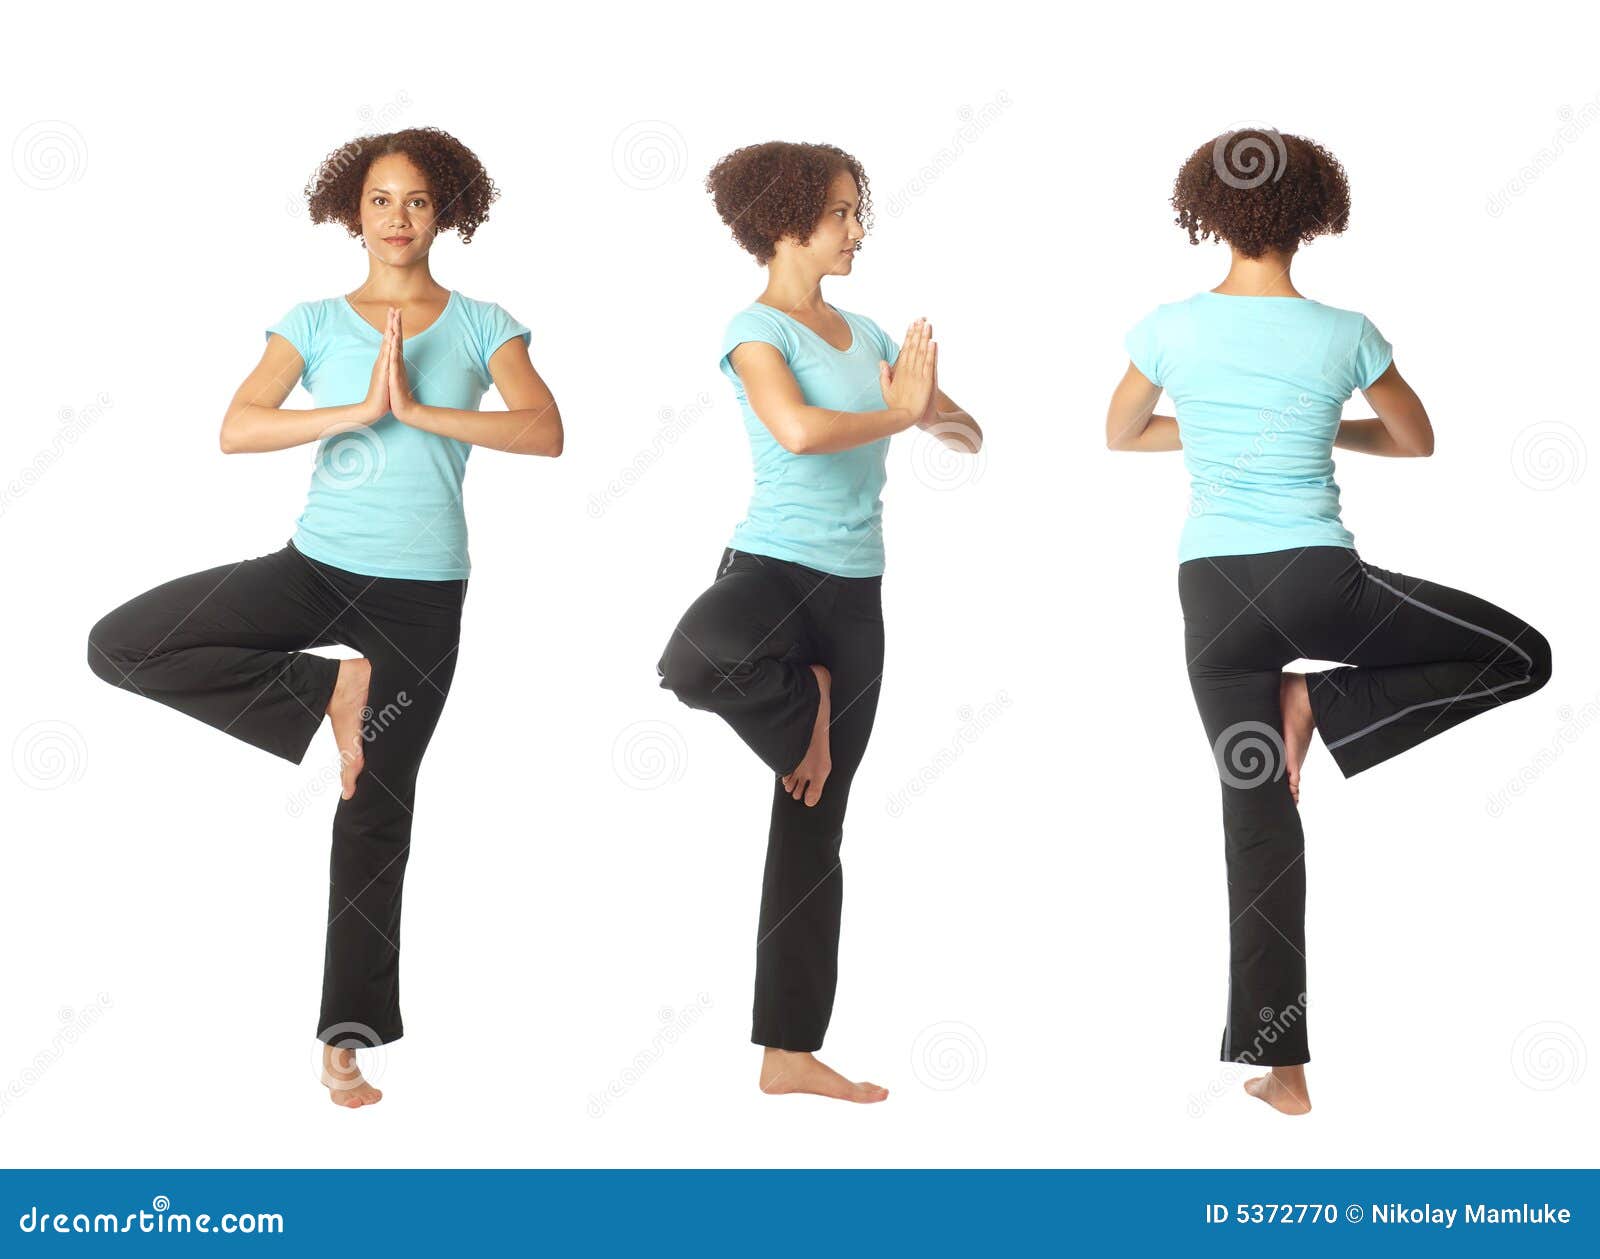 Explore Fun and Easy 3-Person Yoga Poses for Beginners